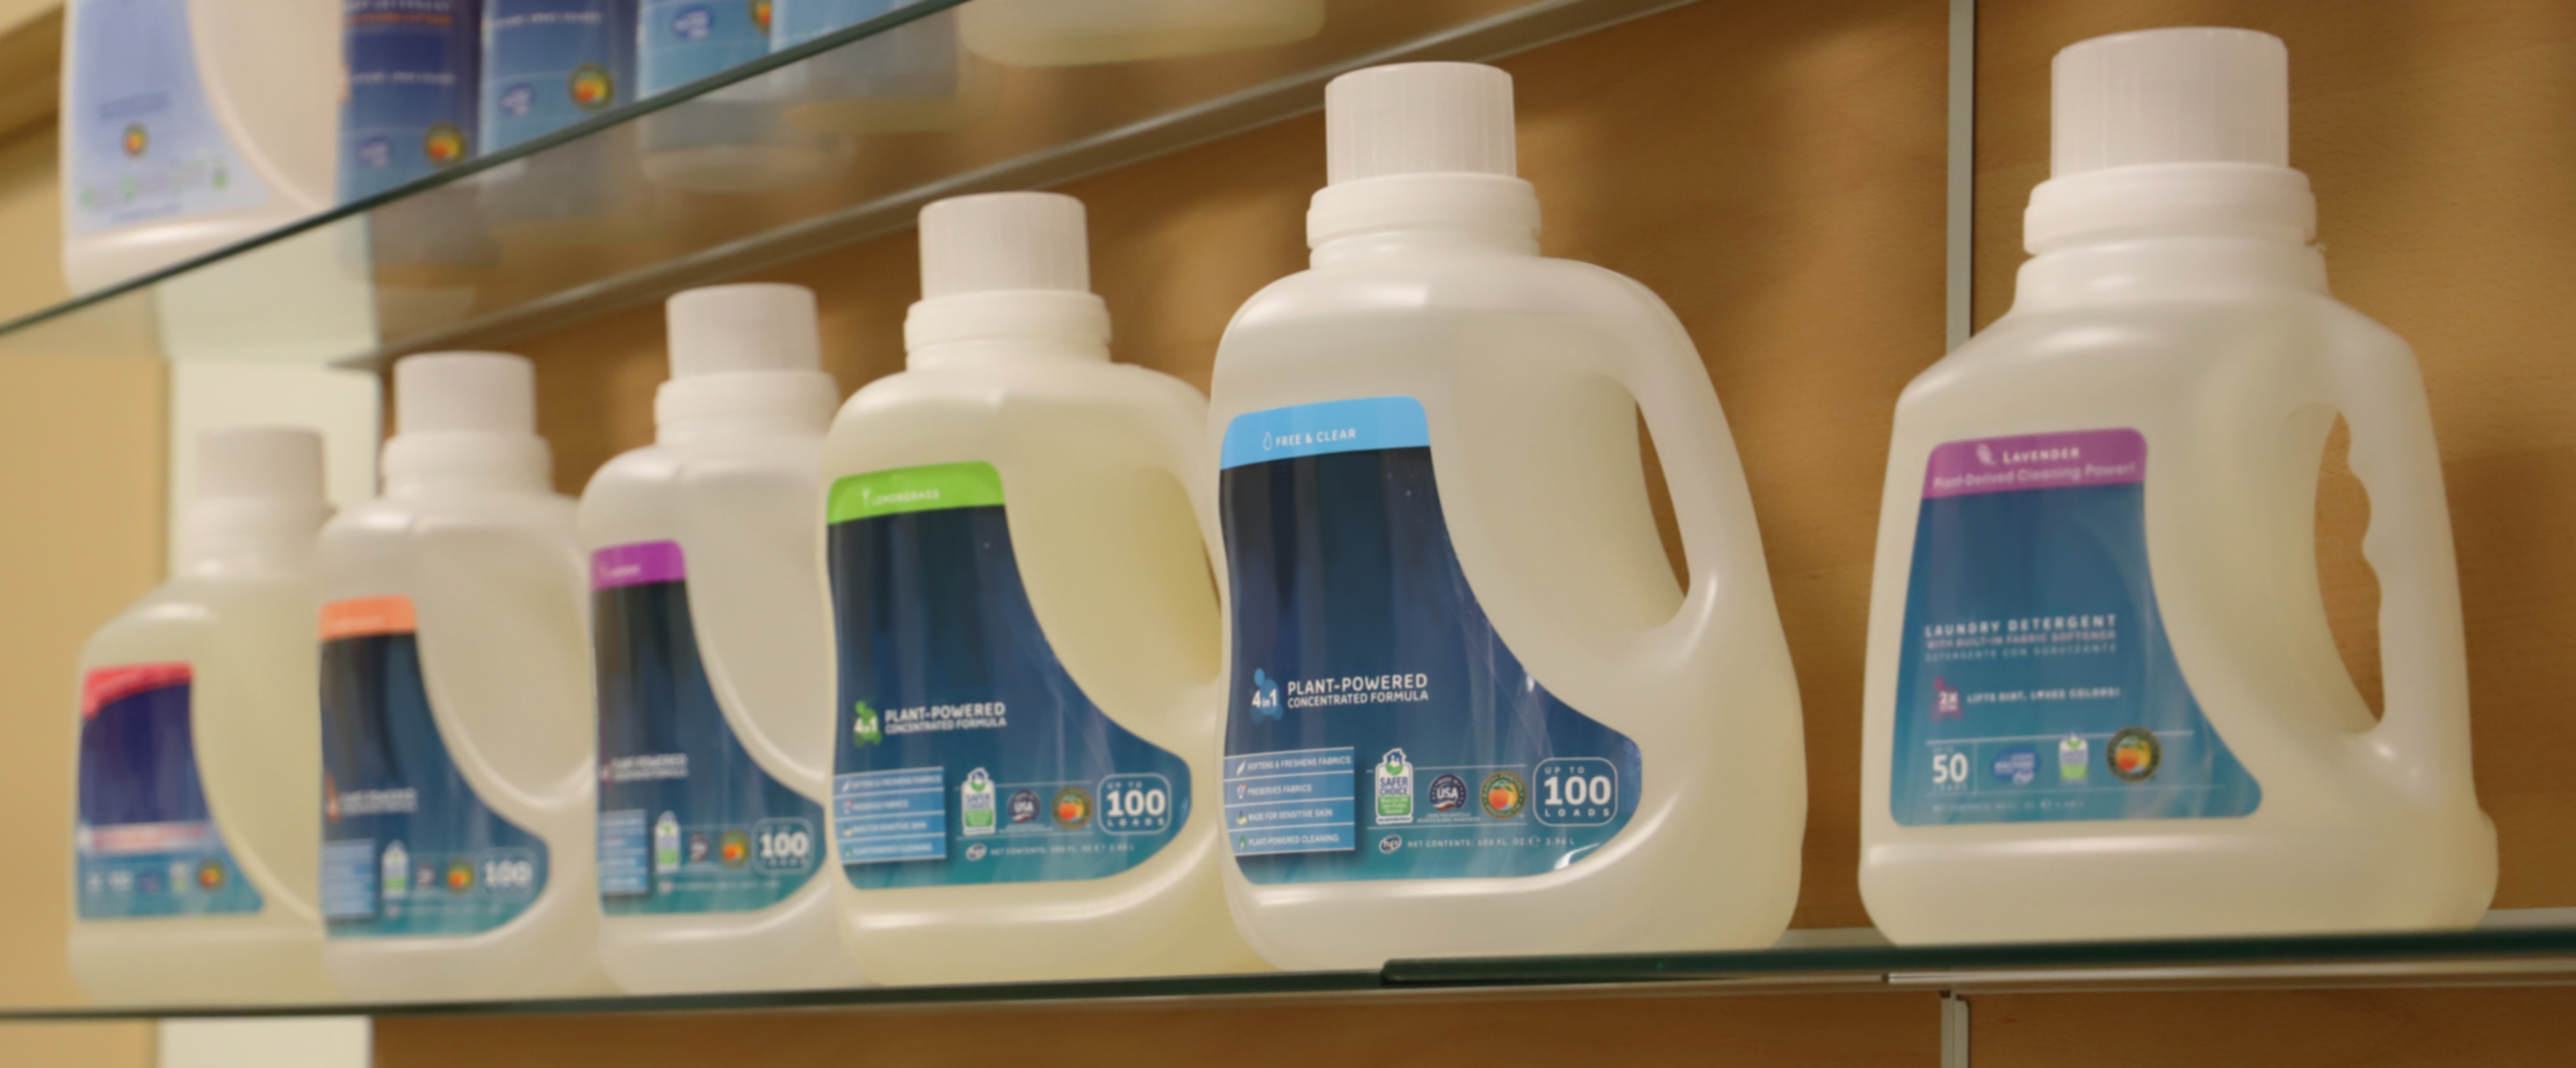 A row of generic detergent bottles on a store shelf.